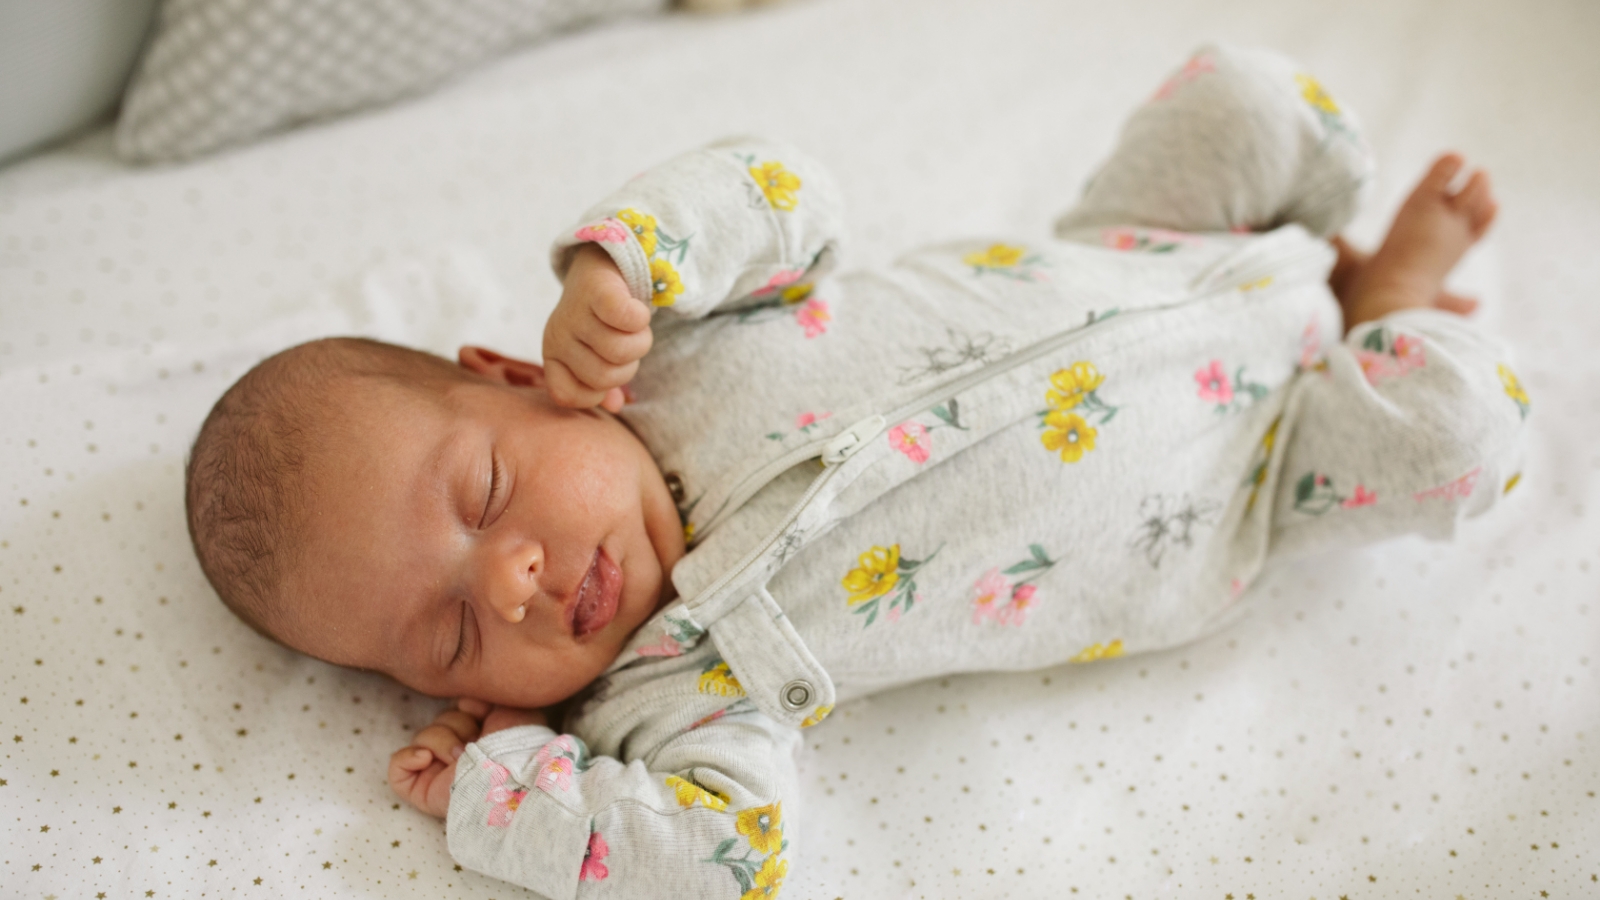 A baby lies on their back, with hands up near the face. The sleep area is free of toys, bedding, and other items.